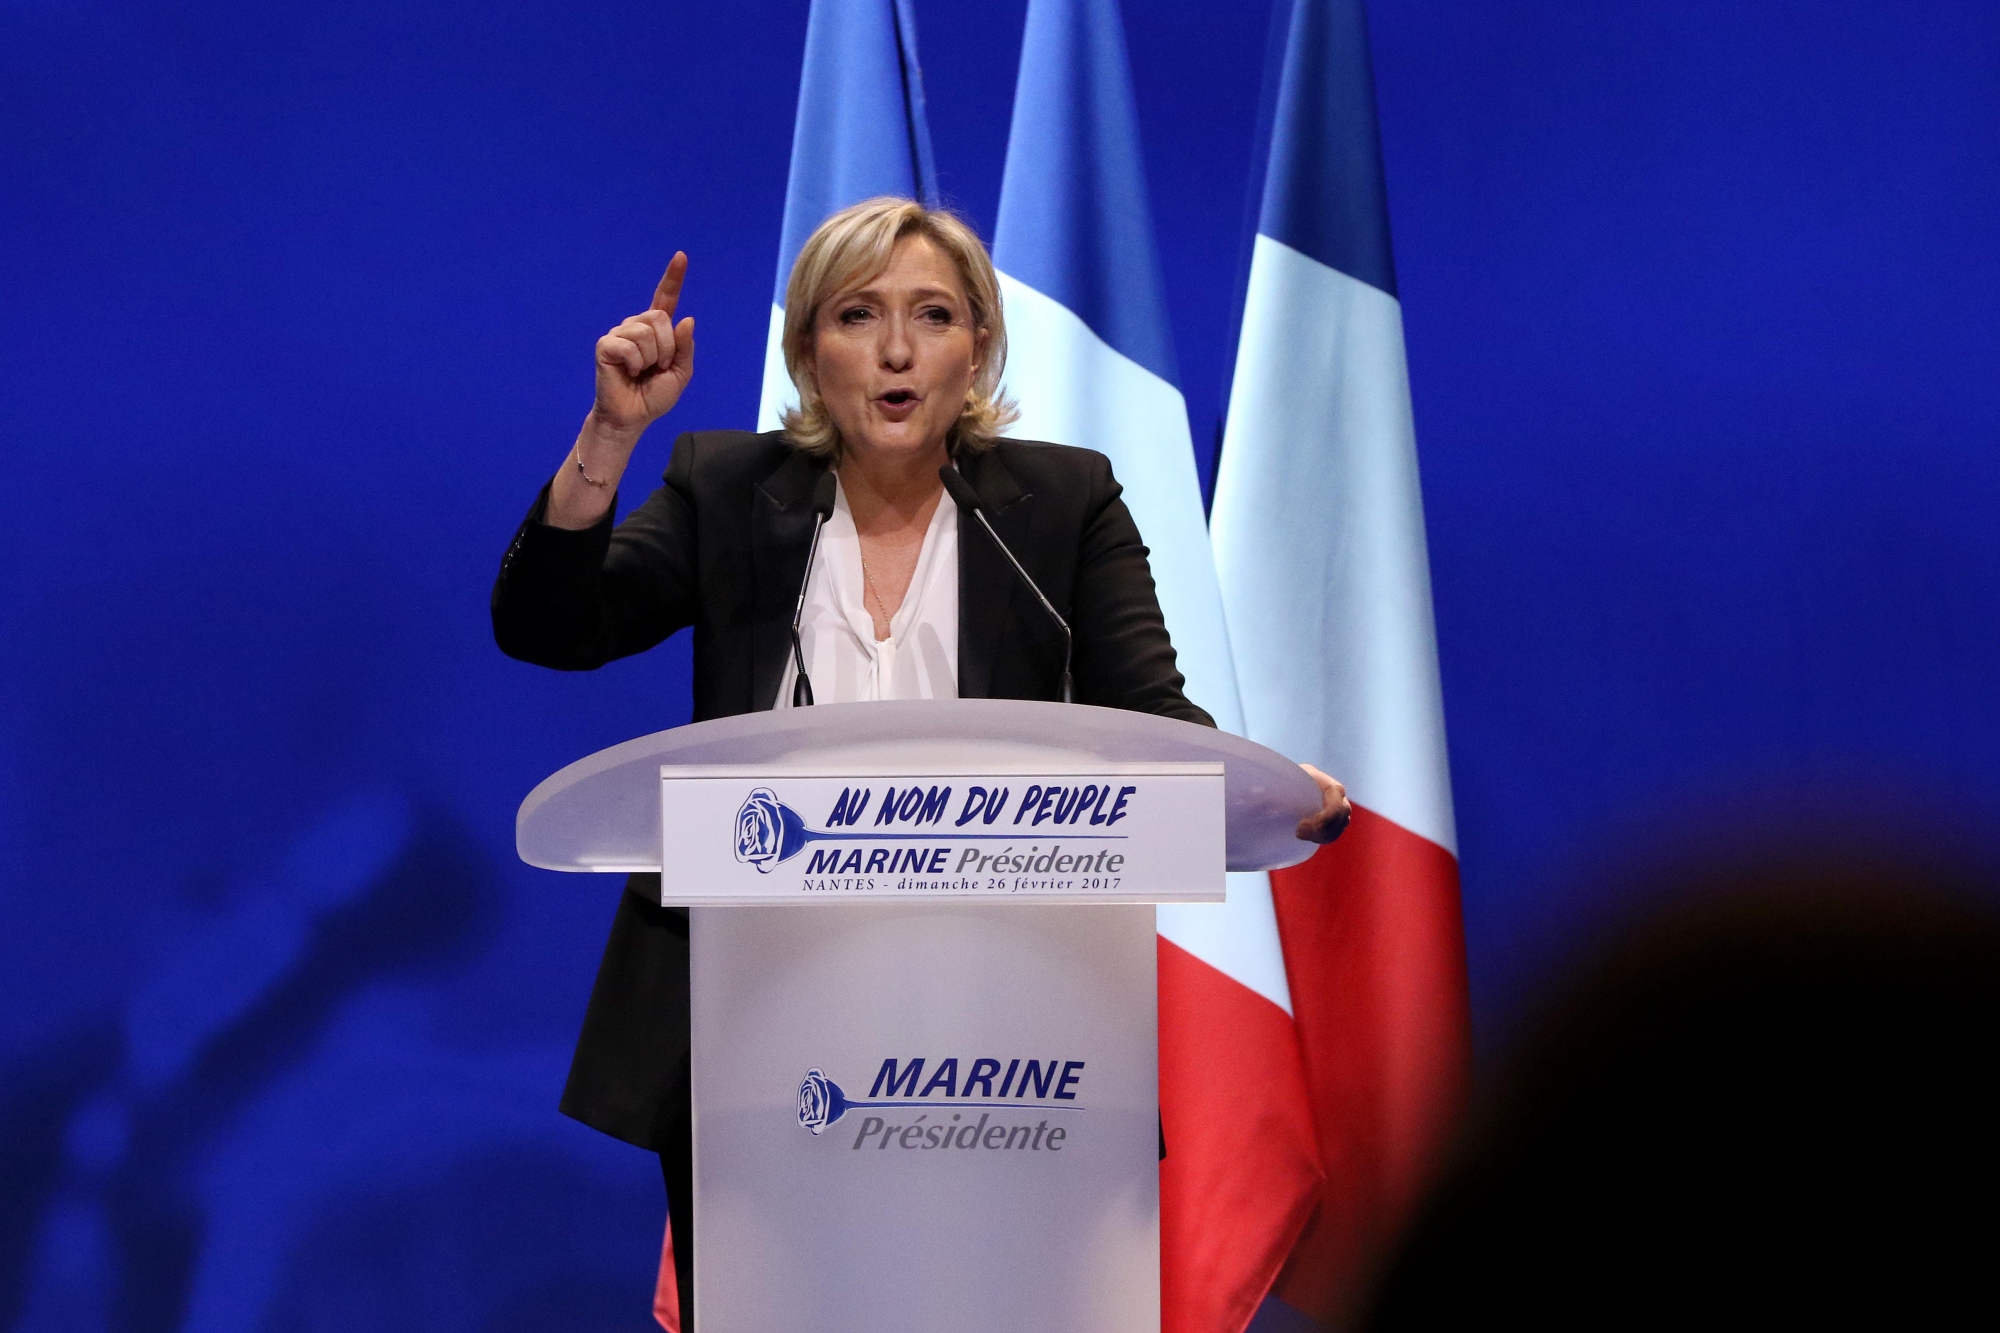 epa05816396 Marine Le Pen, the leader of France's far-right Front National (FN) political party and candidate for the 2017 French presidential elections, delivers a speech during the Front National presidential campaign rally in Nantes, France, 26 February 2017. France holds the first round of the 2017 presidential elections on 23 April 2017.  EPA/EDDY LEMAISTRE FRANCE ELECTIONS PARTIES